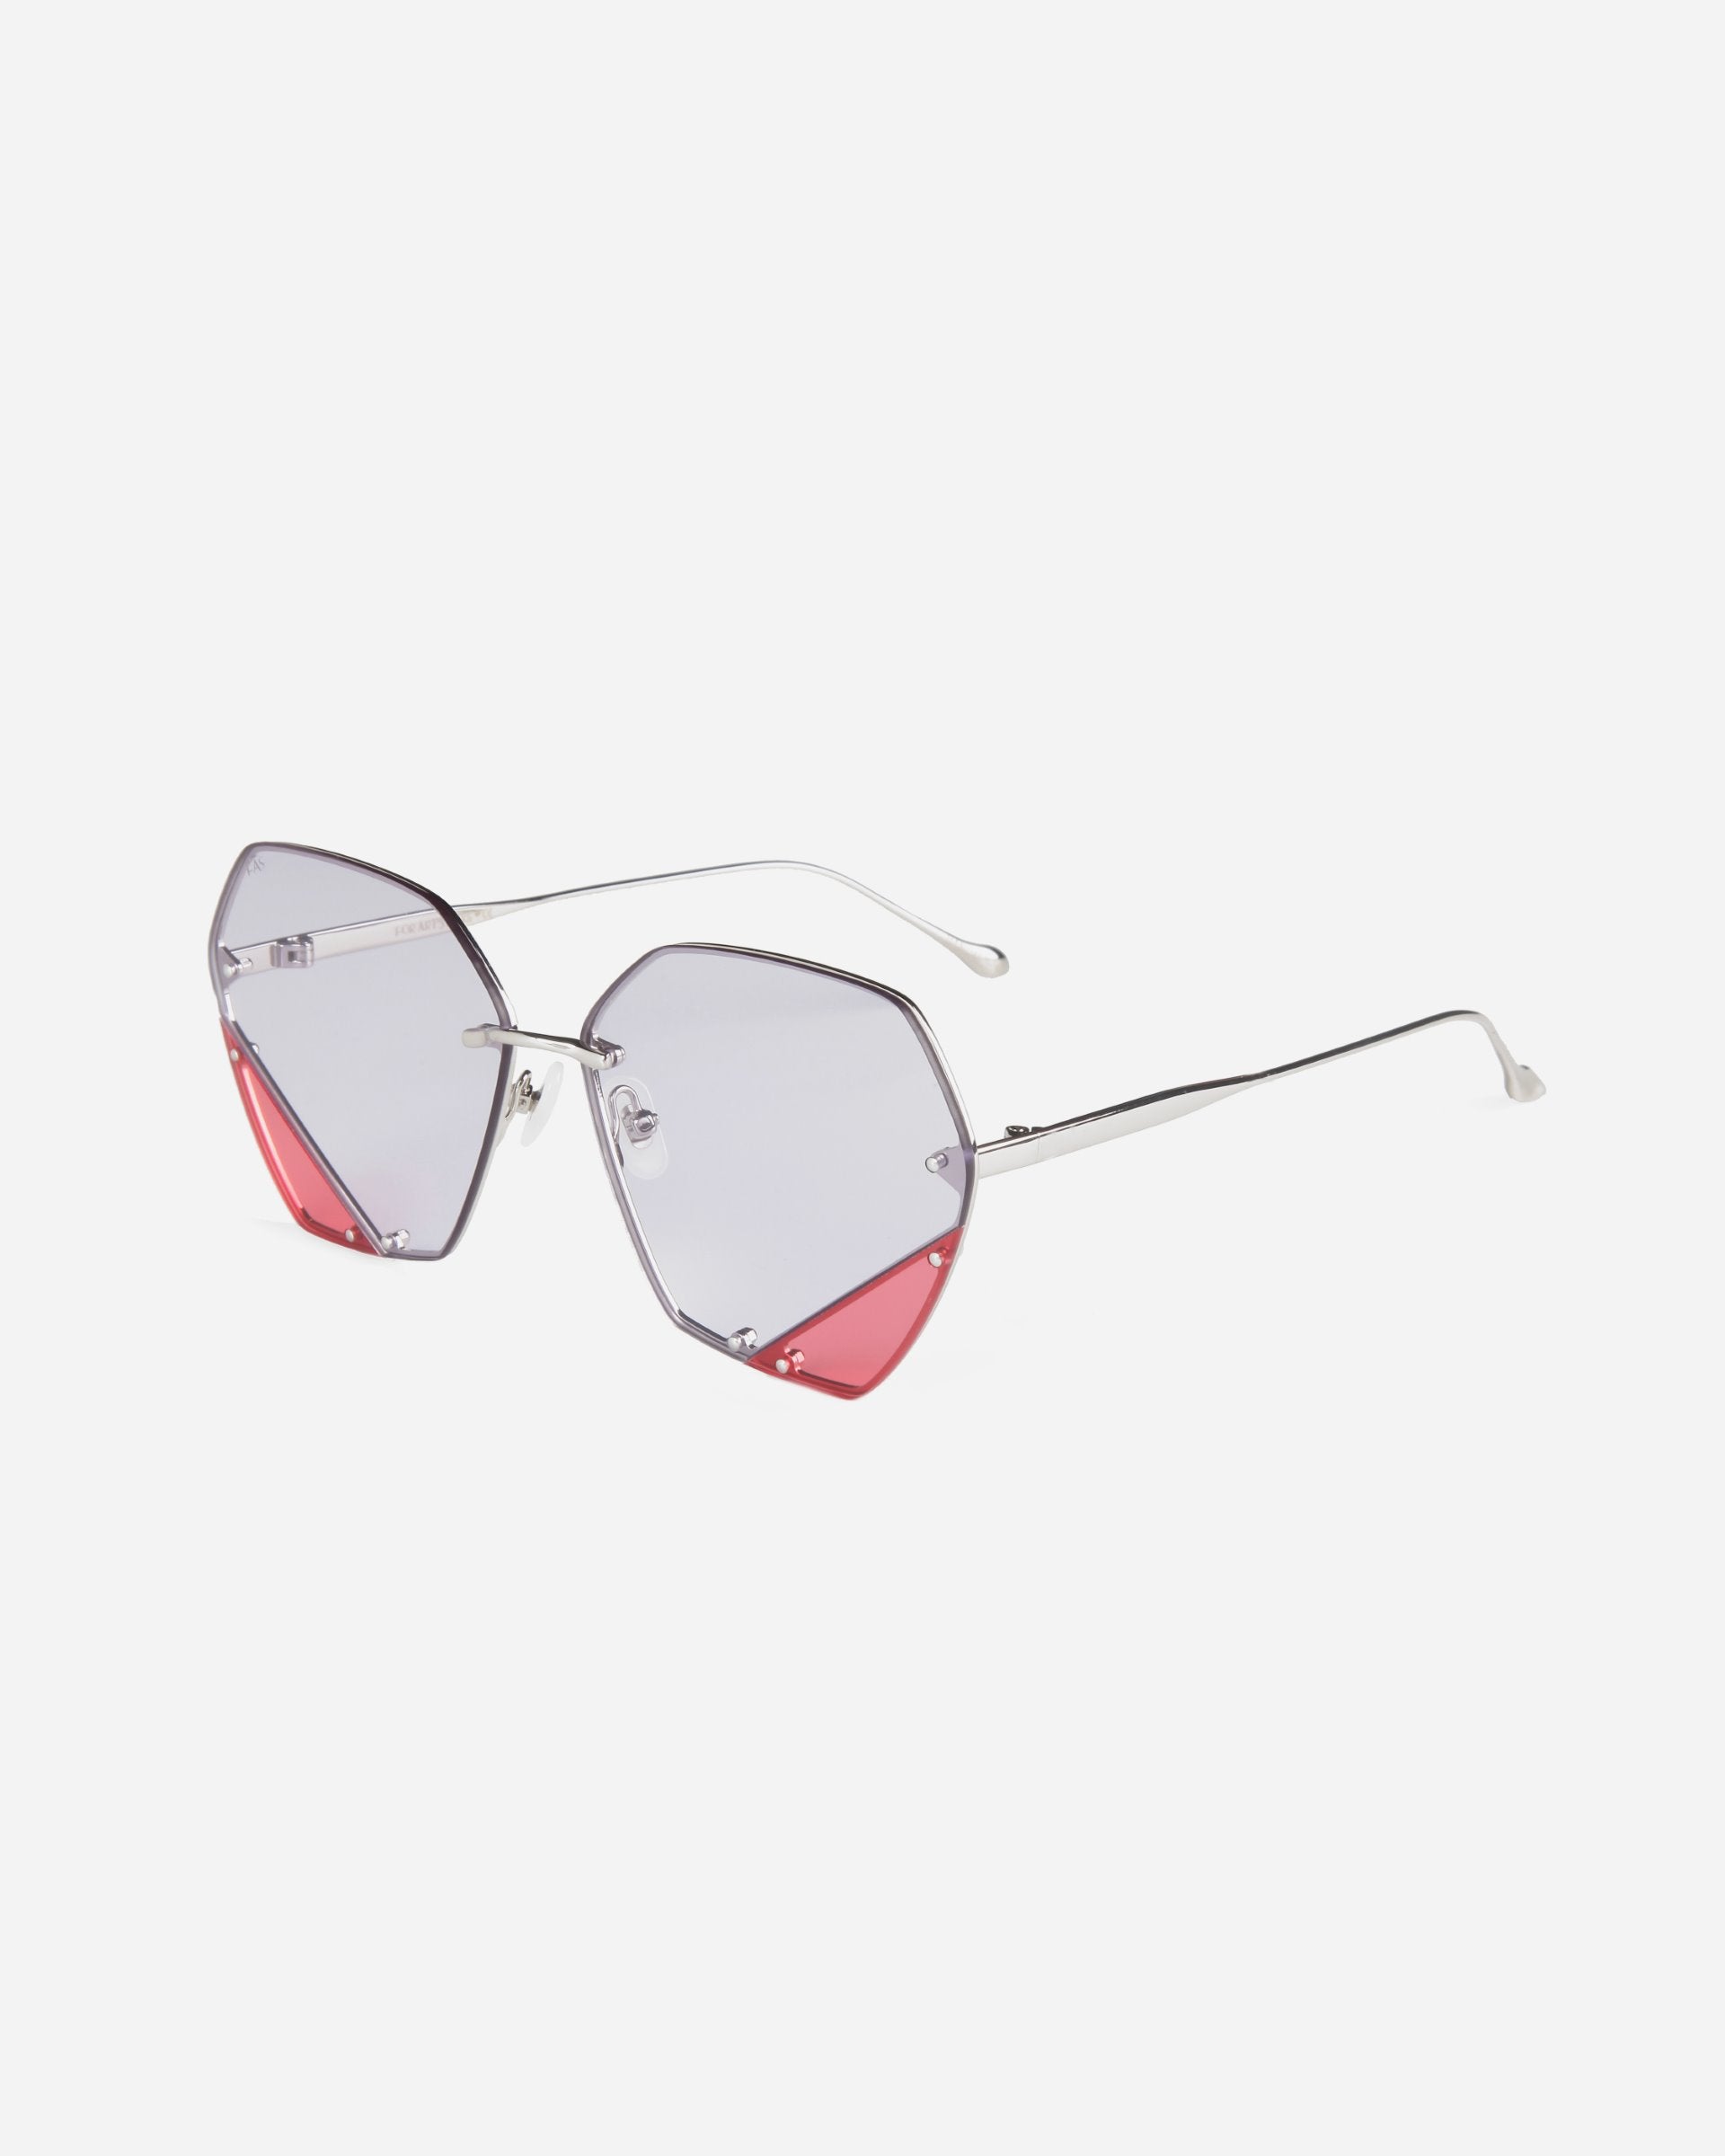 A pair of stylish, geometric For Art's Sake® Icy sunglasses with silver metal frames and gradient lenses, offering UV protection. The lenses are primarily blueish-gray with red tinting on the lower edges. The temples are thin and silver, extending to matching earpieces with jadestone nosepads. The background is white.